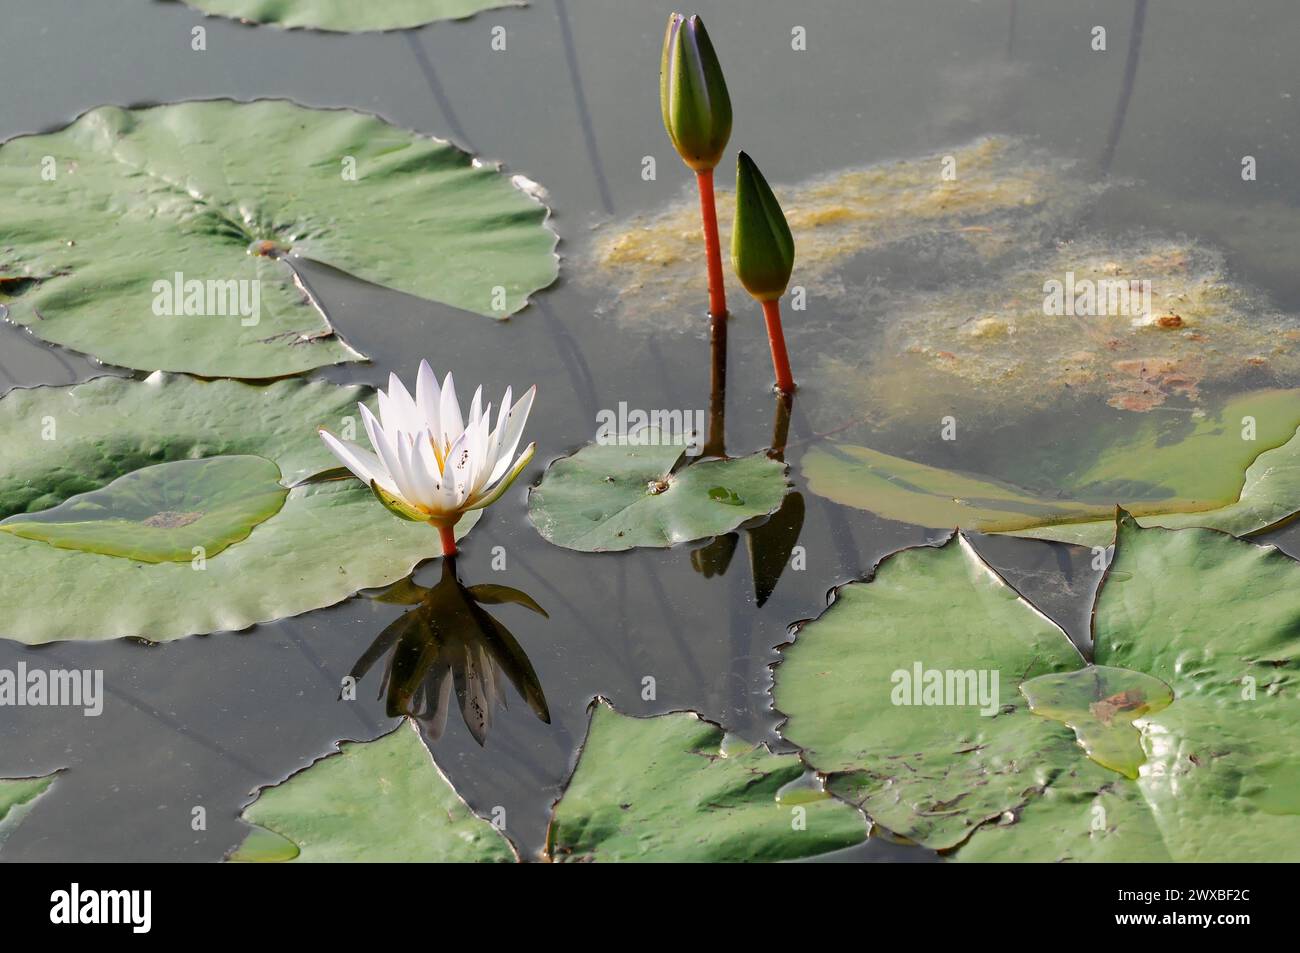 White water lily (Nymphaea lotus), captive, next to a bud on the water surface with foliage, Stuttgart, Germany Stock Photo